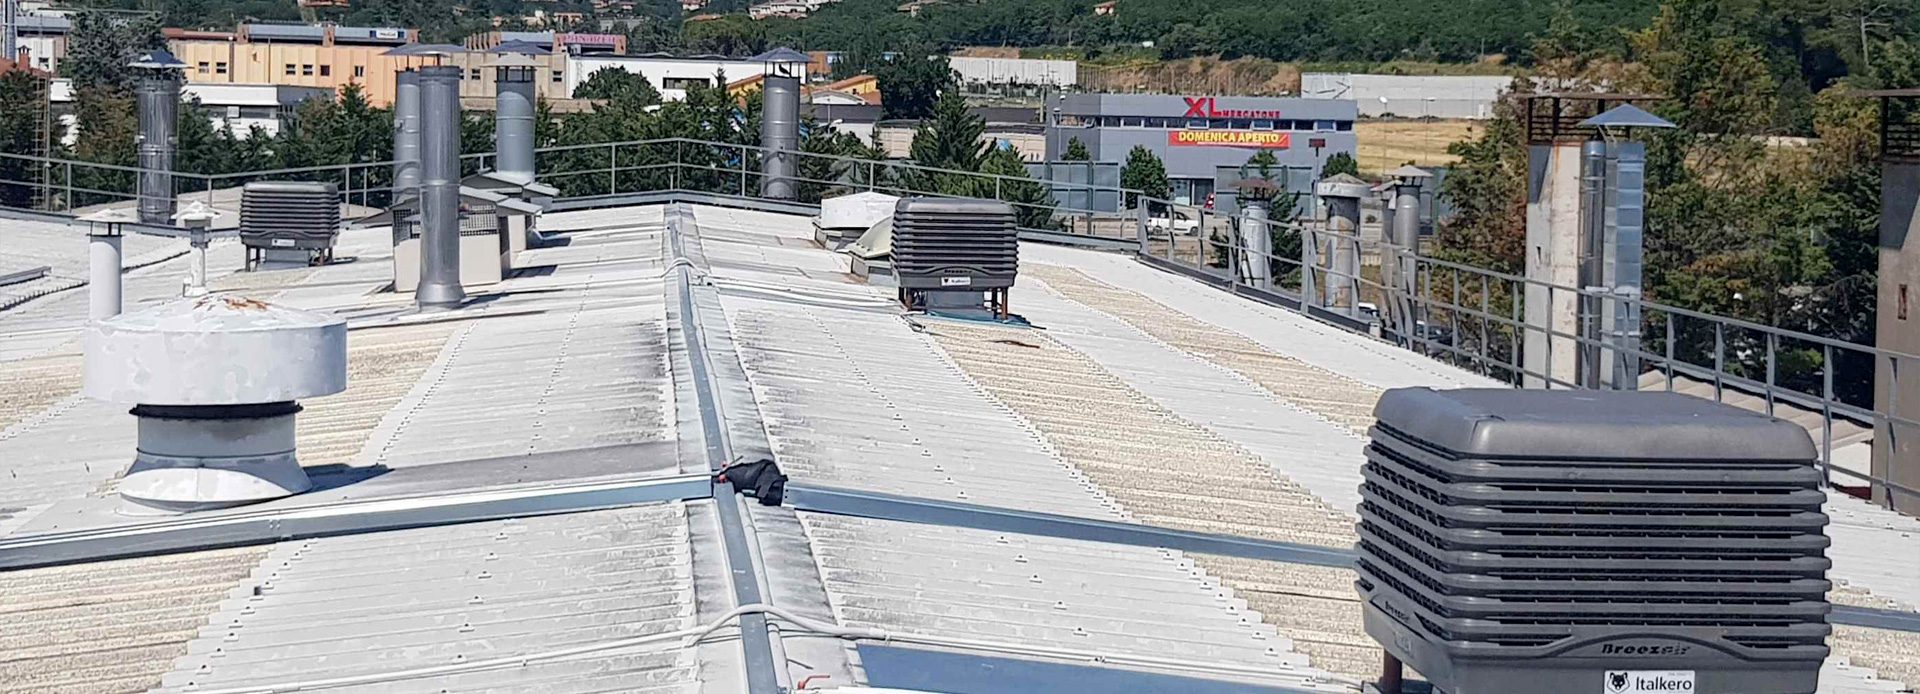 Breezair evaporative coolers installed on production plant warehouse rooftop